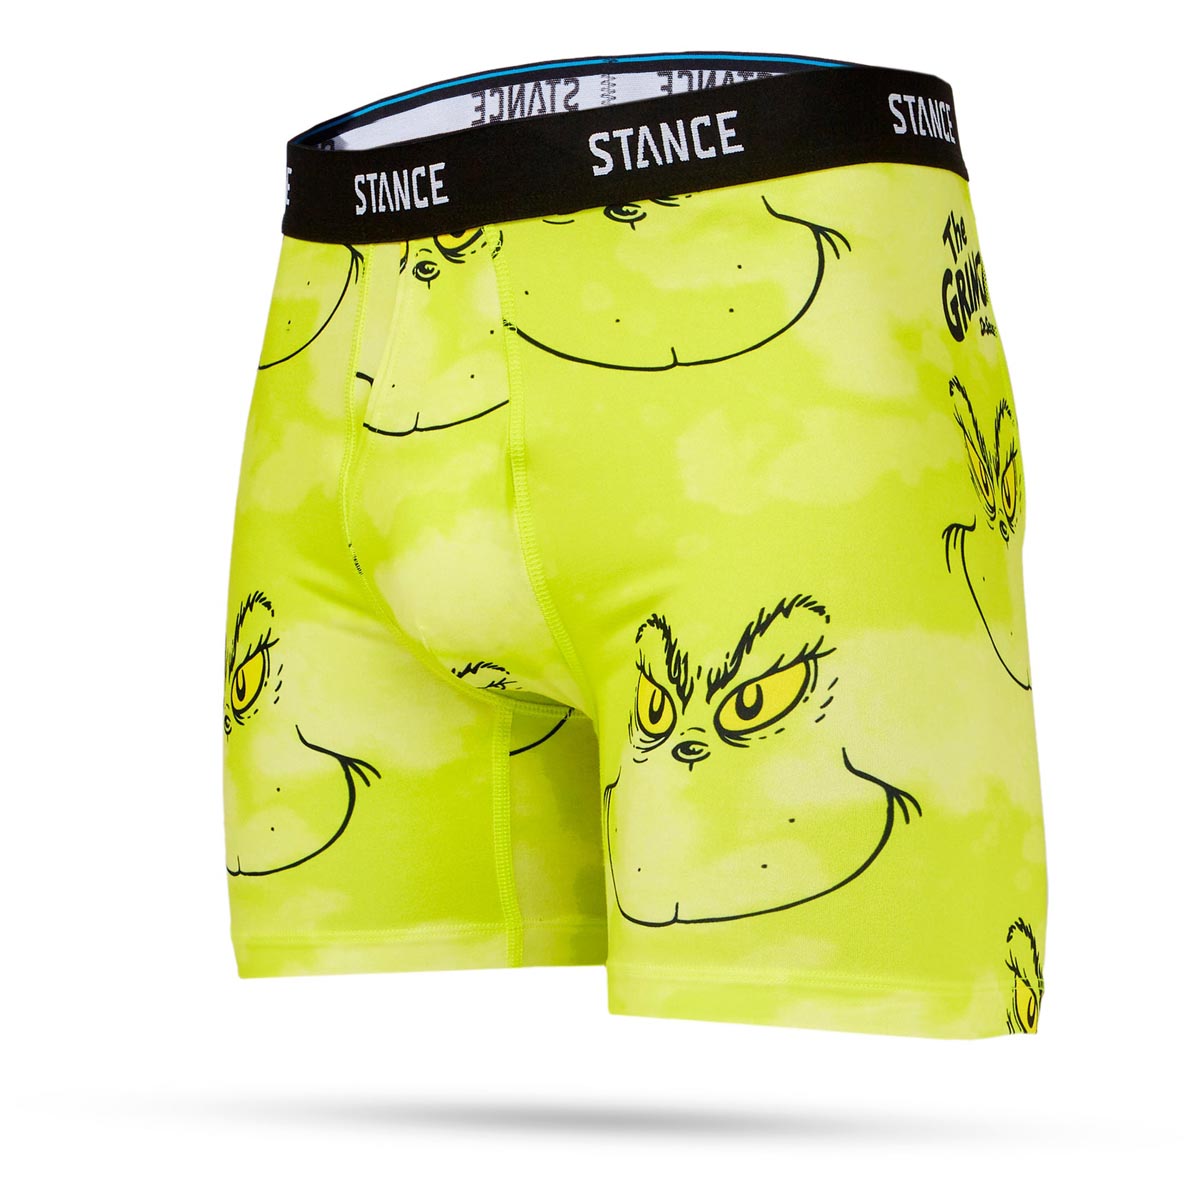 Stance Stole Boxer Brief - Green image 1